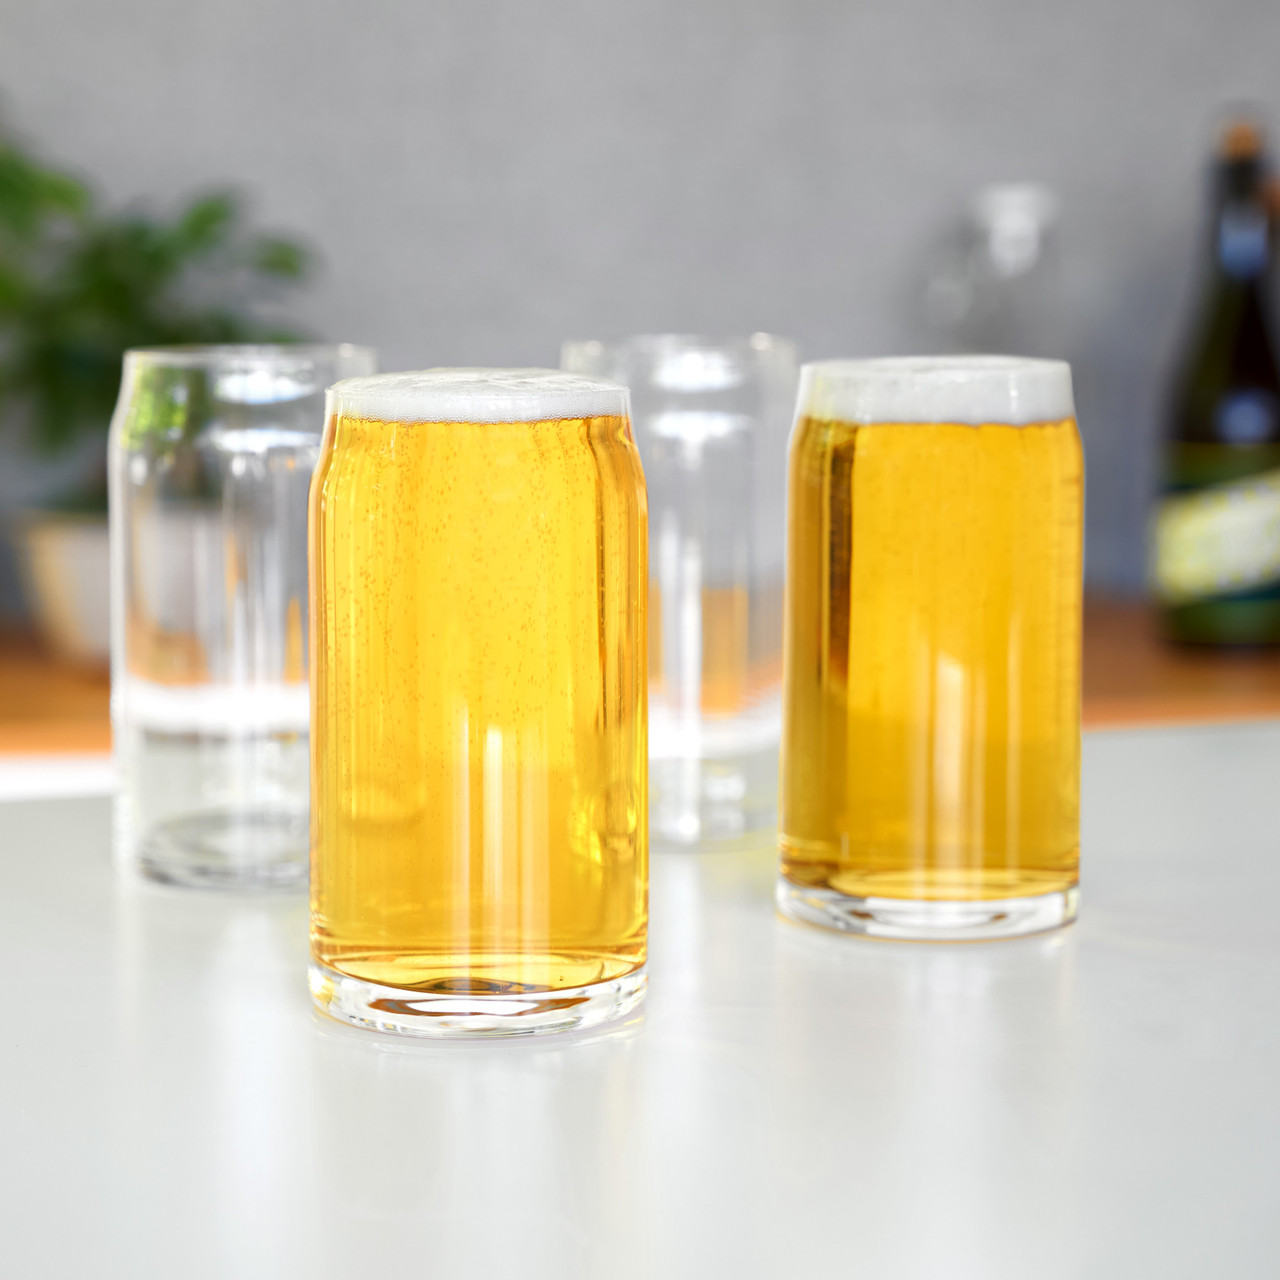 https://cdn11.bigcommerce.com/s-oo0gdojvjo/images/stencil/1280x1280/products/68504/101127/beer-can-pint-glasses-by-true-set-of-4-2__96706.1683795481.jpg?c=2&imbypass=on